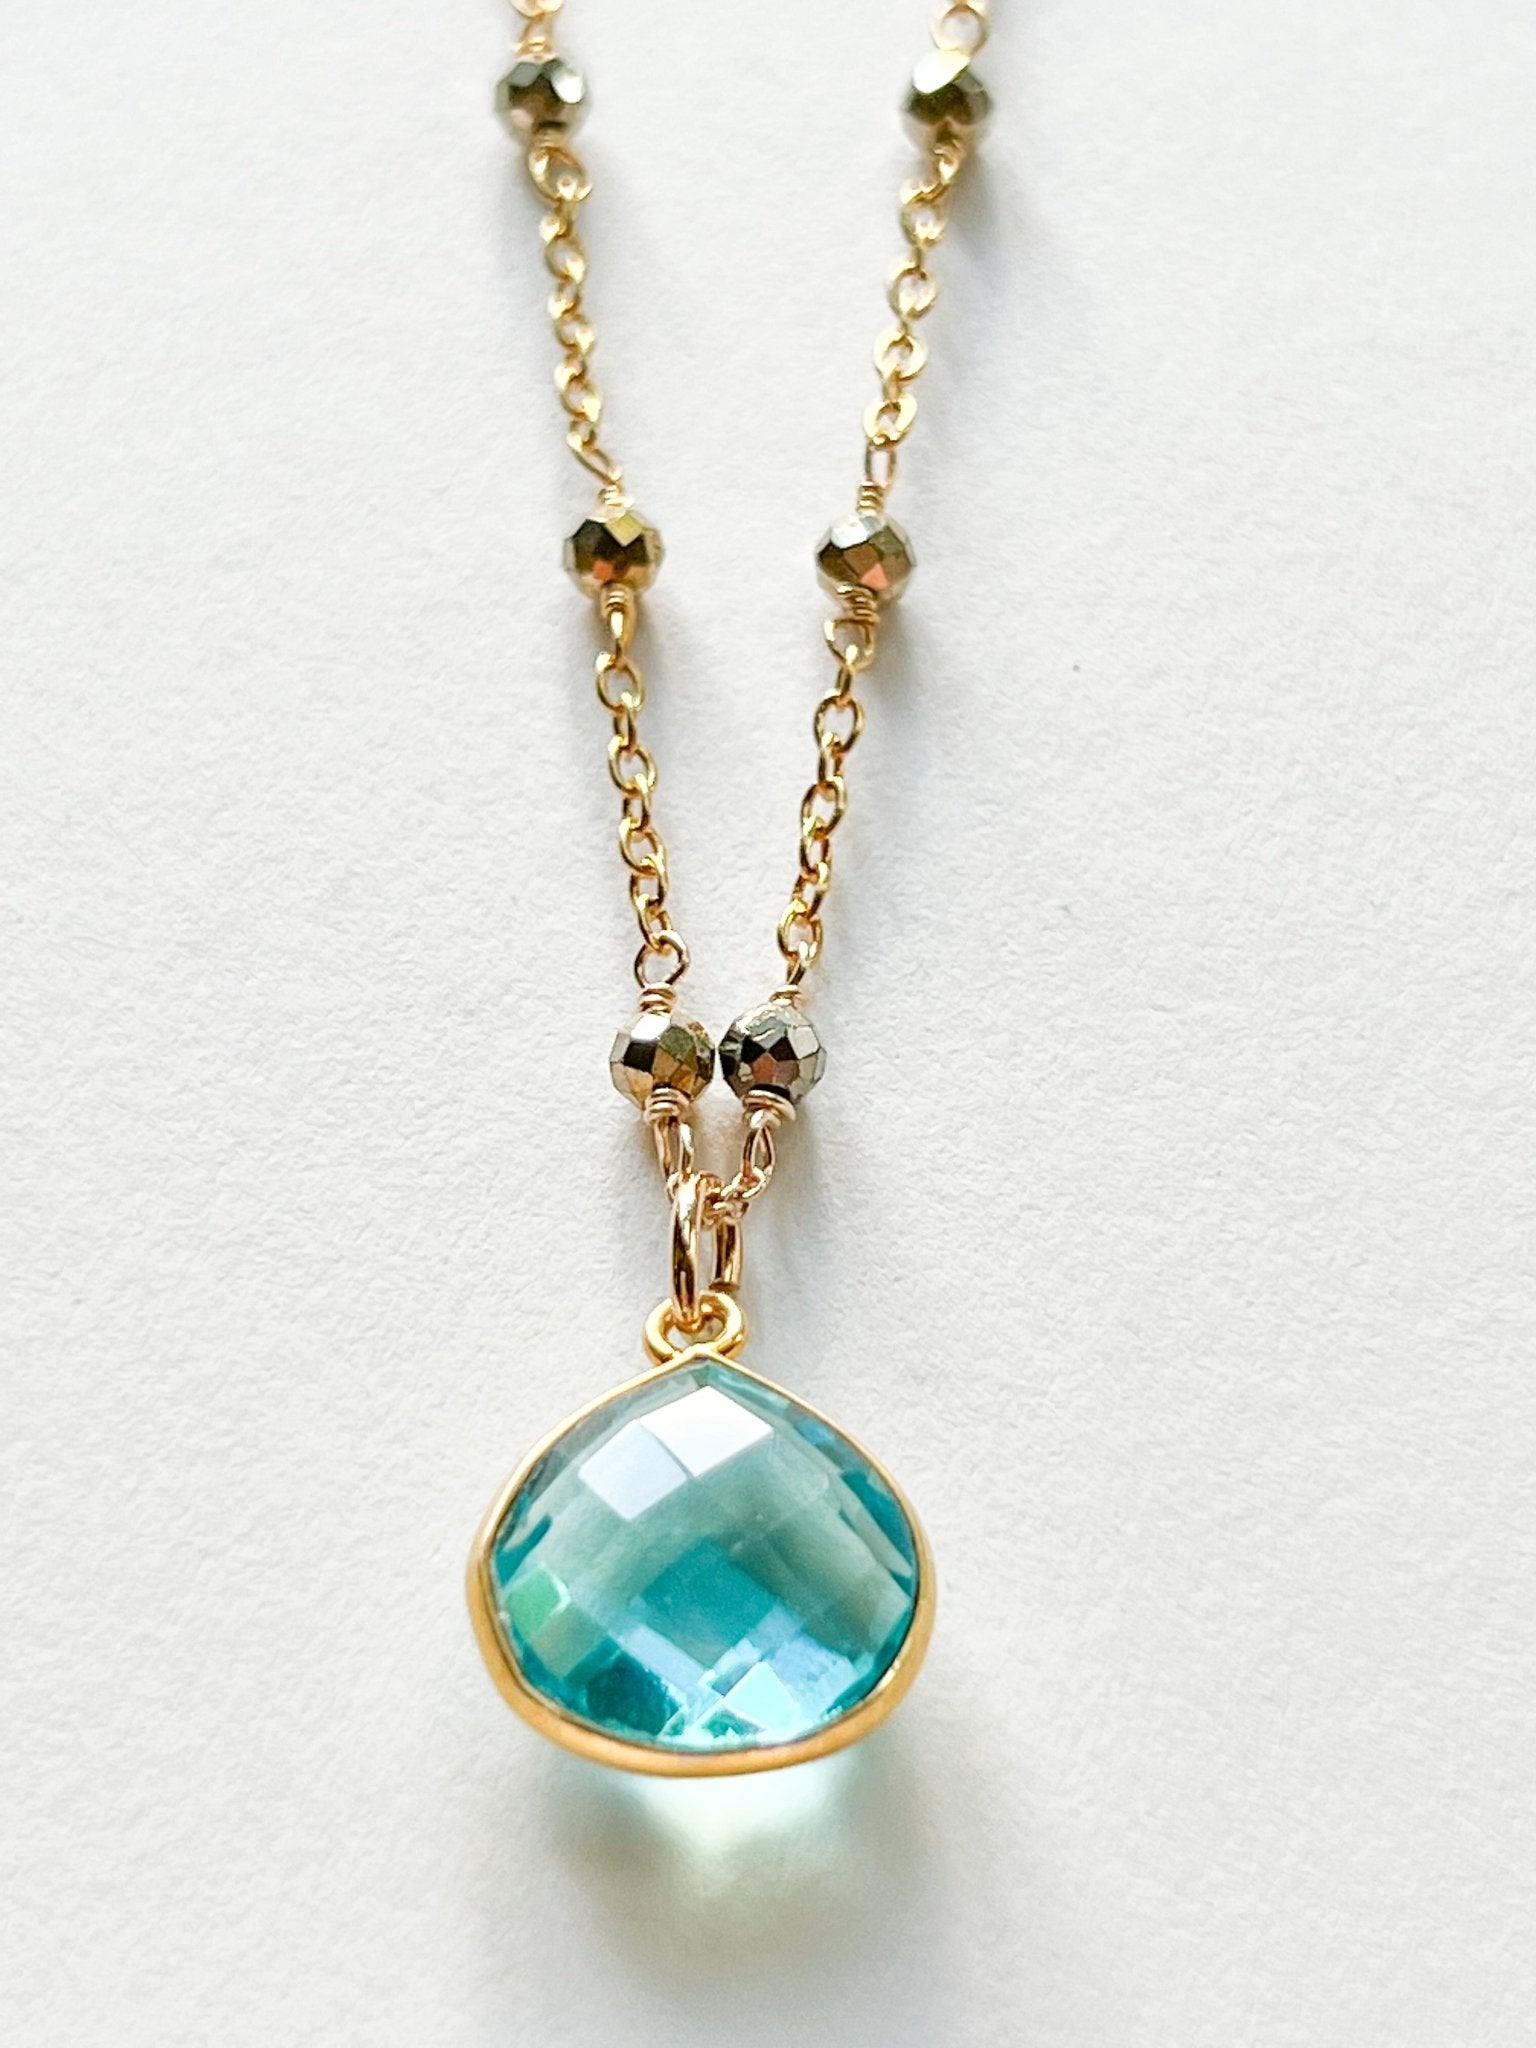 Blue Topaz Teardrop Charm Necklace on Gold Chain with Golden Pyrite by Sage Machado - The Sage Lifestyle